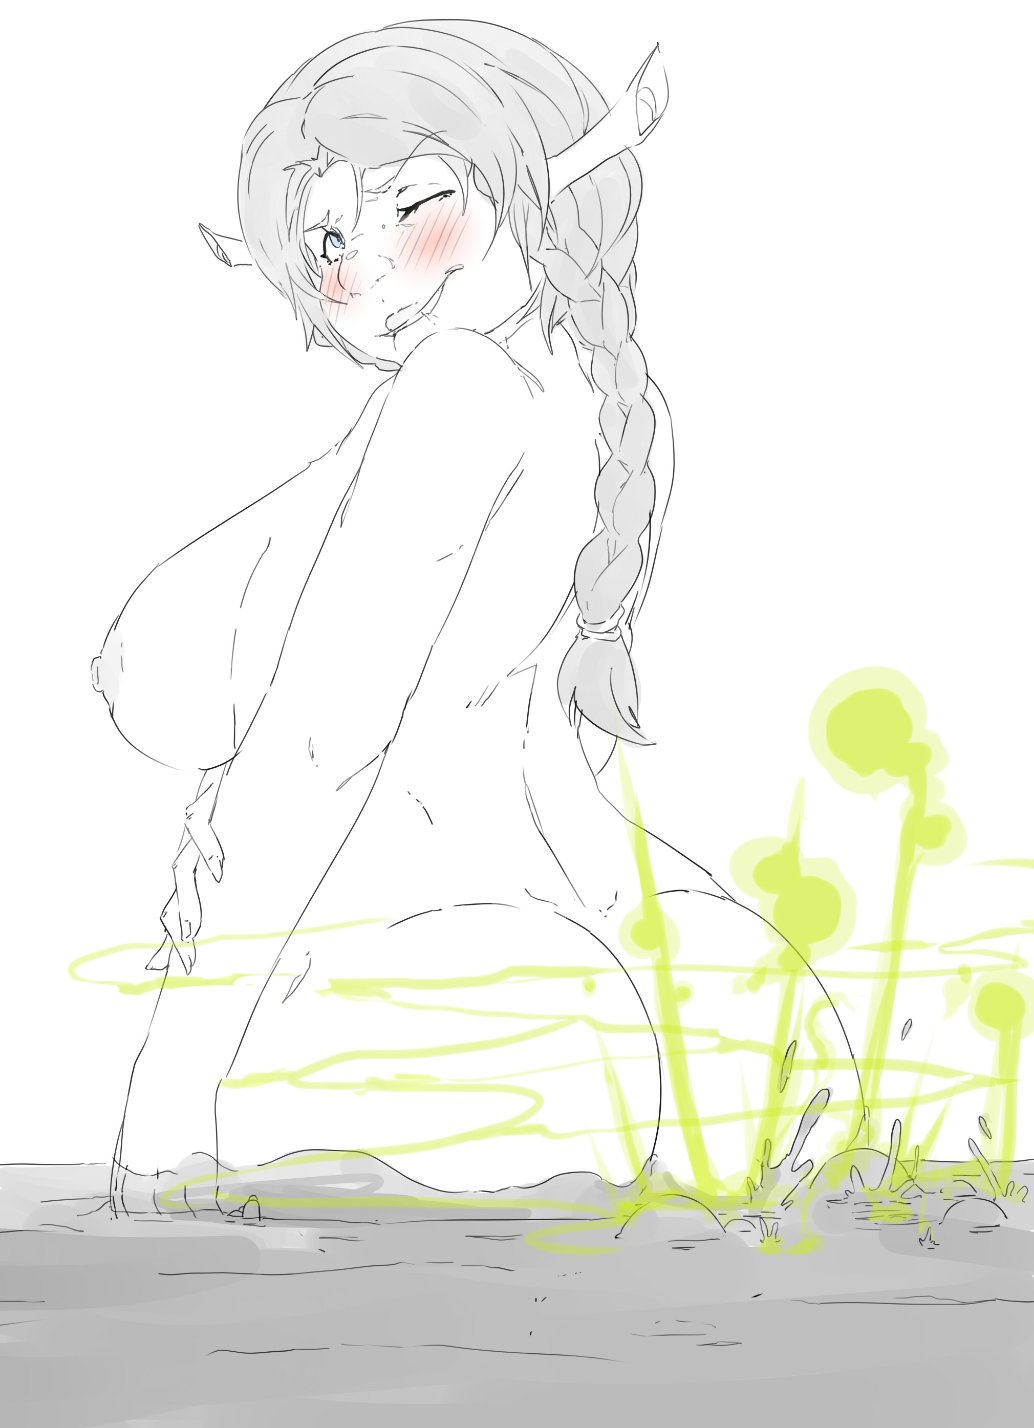 Lazei na Twitterze: "Ogre Fiona Farting in the Swamp Request